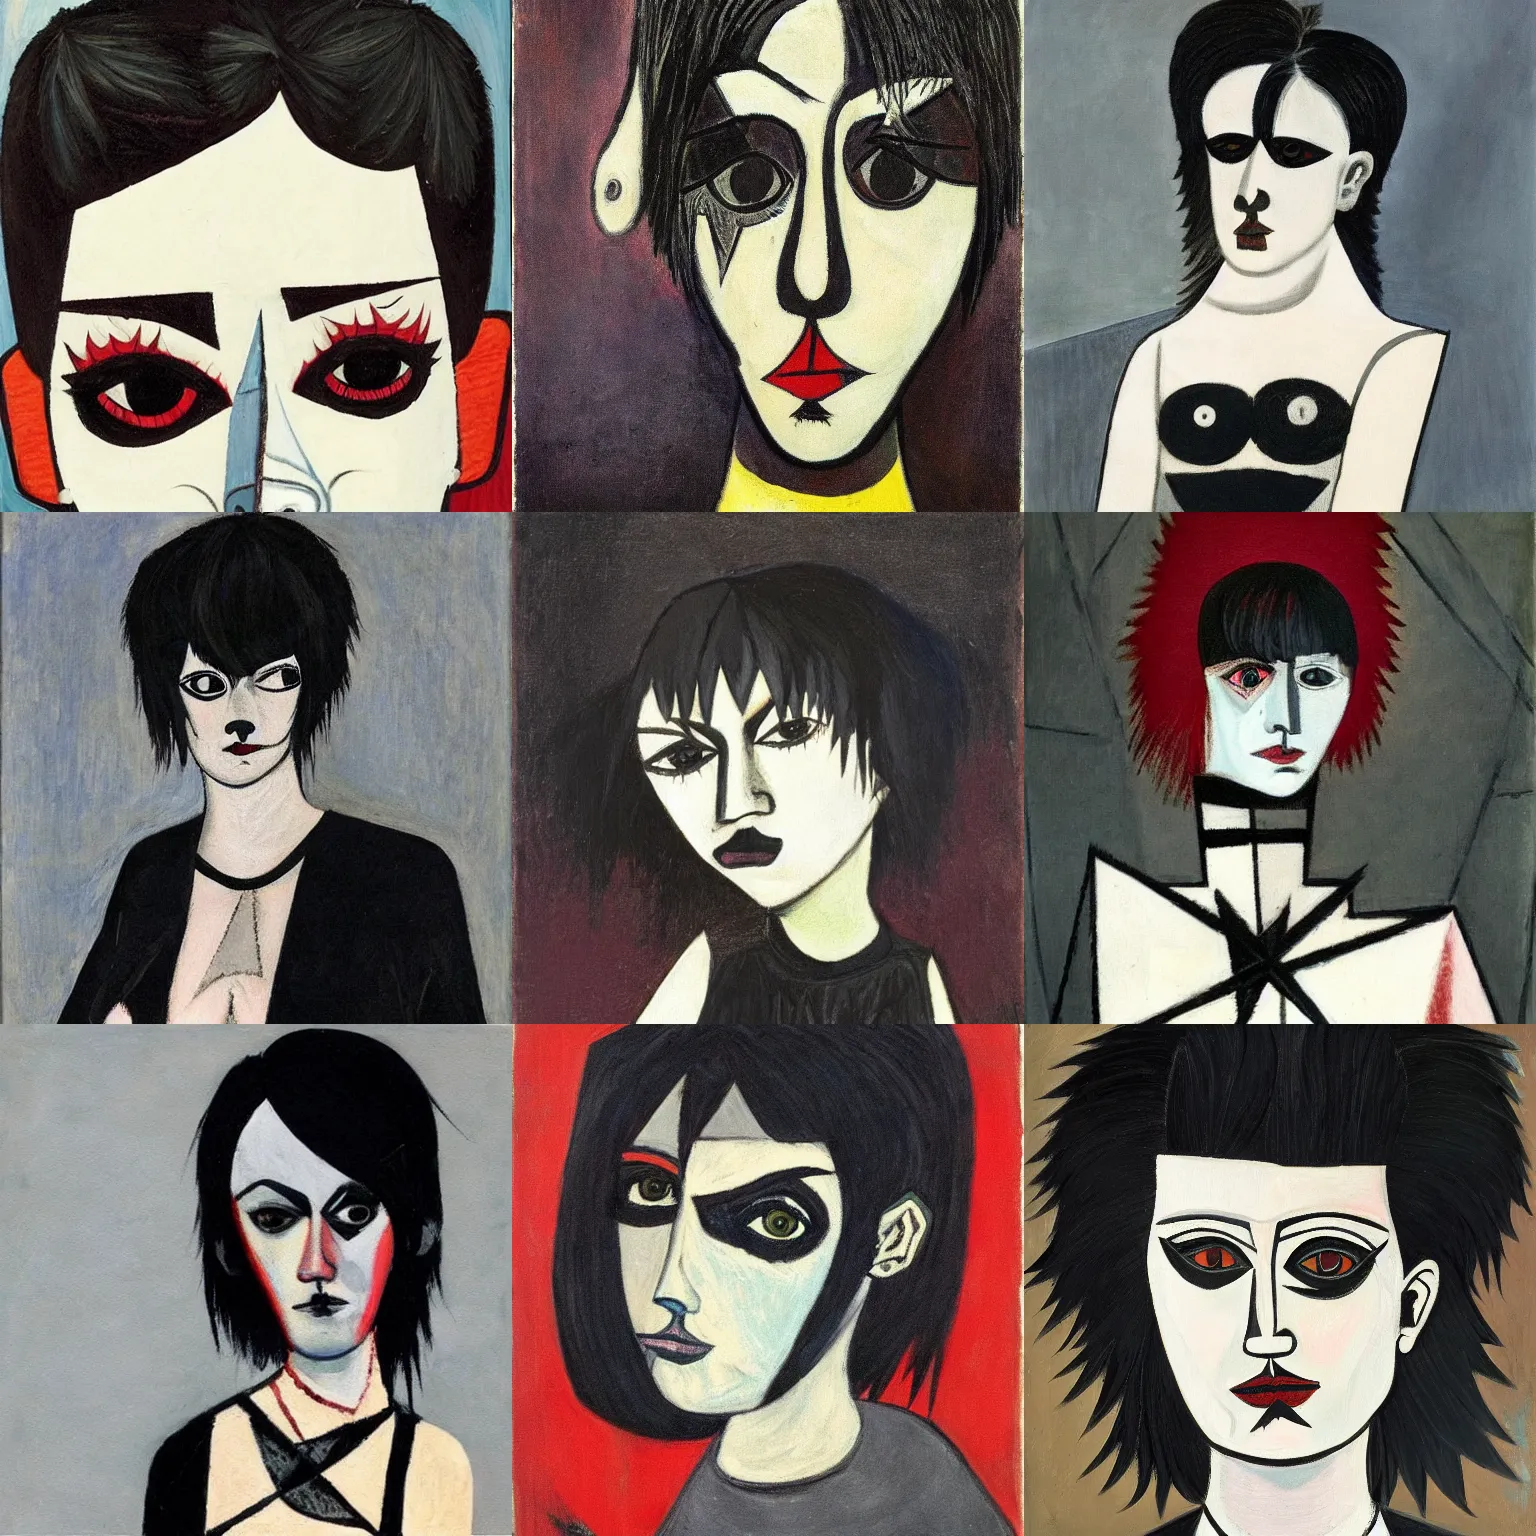 Prompt: an hd goth emo punk painted by pablo picasso. her hair is dark brown and cut into a short, messy pixie cut. she has a slightly rounded face, with a pointed chin, large entirely - black eyes, and a small nose. she is wearing a black tank top, a black leather jacket, a black knee - length skirt, and a black choker.